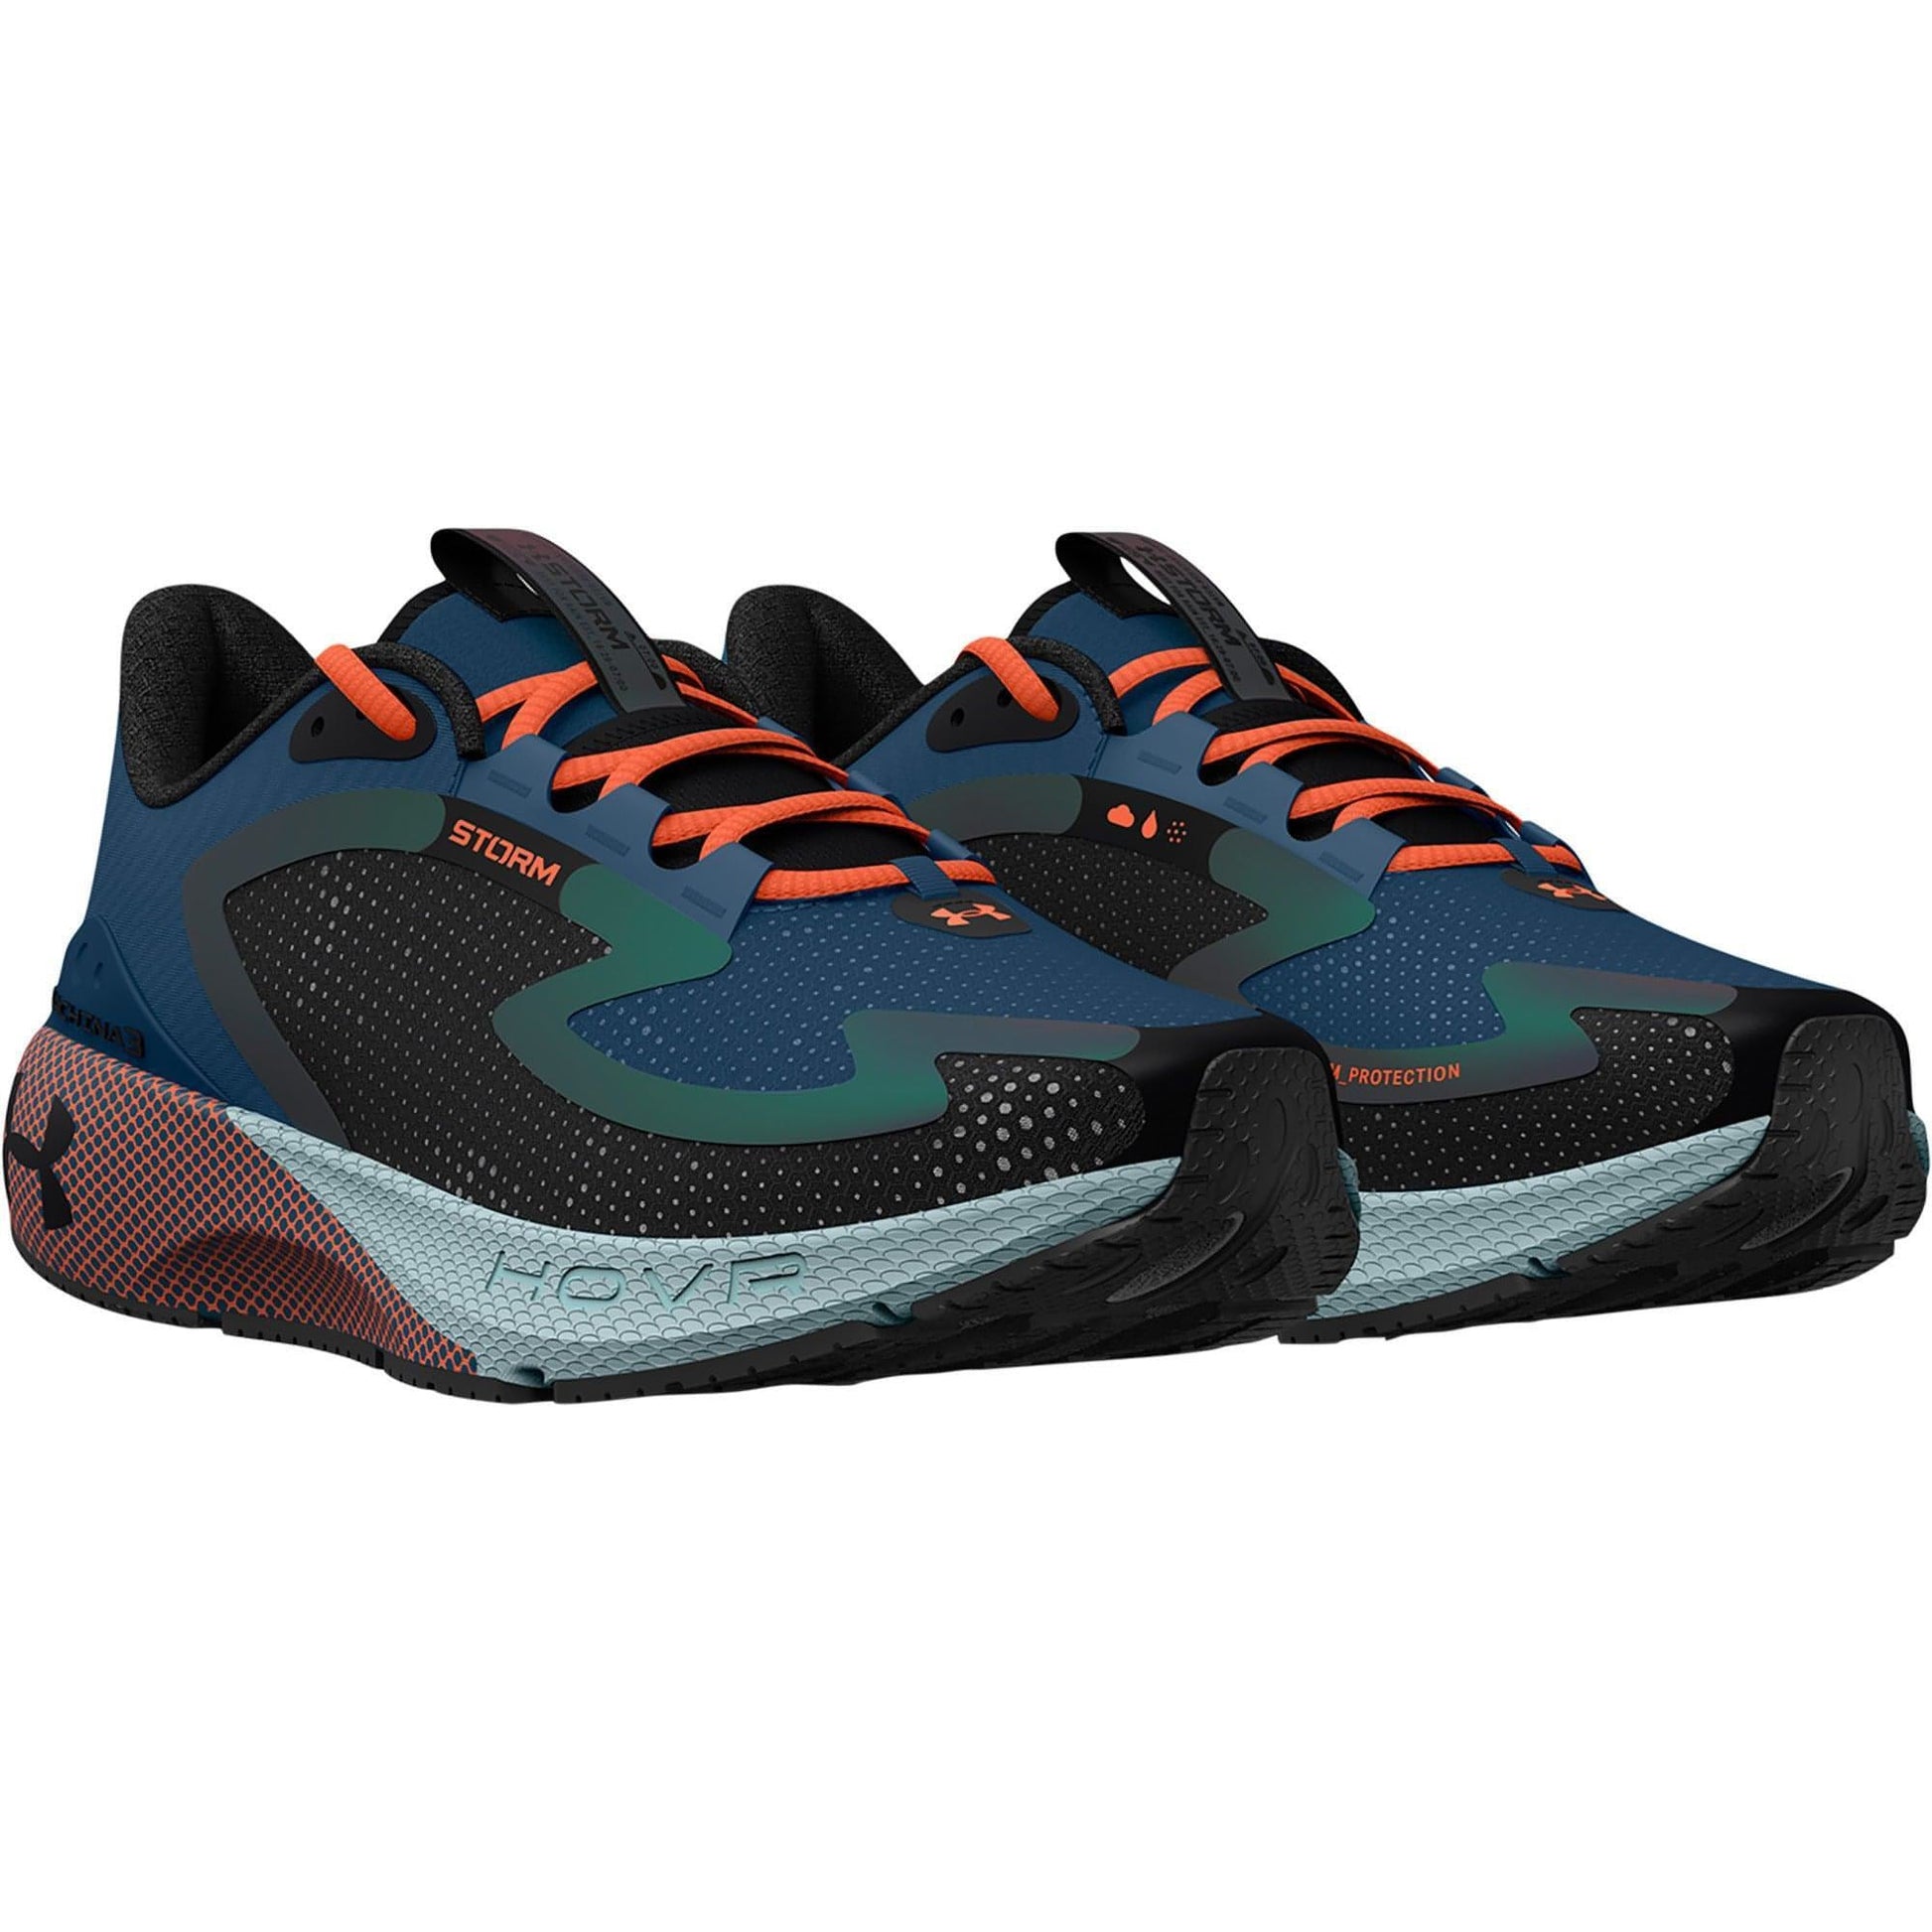 Under Armour Hovr Machina Storm Front - Front View